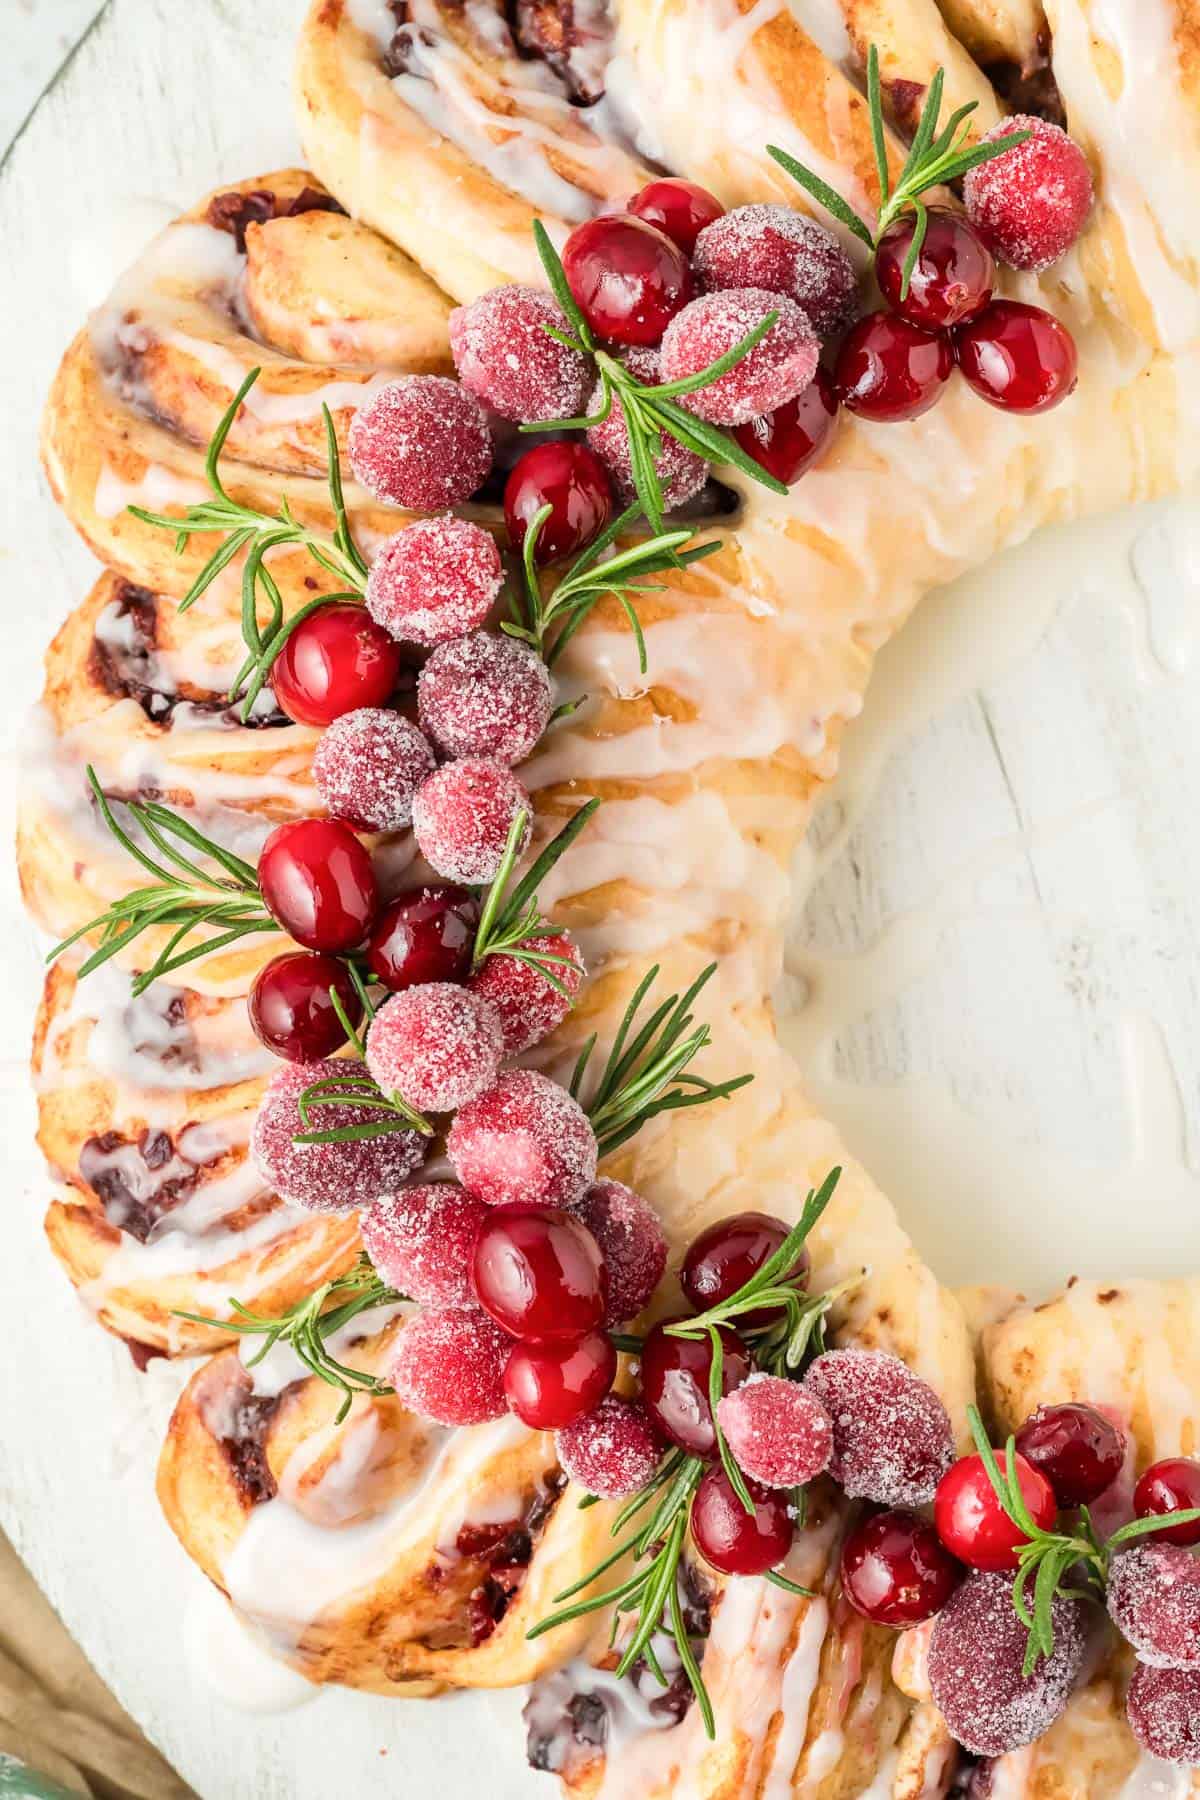 Close up of the sugared cranberries and rosemary decor on a cinnamon roll wreath.